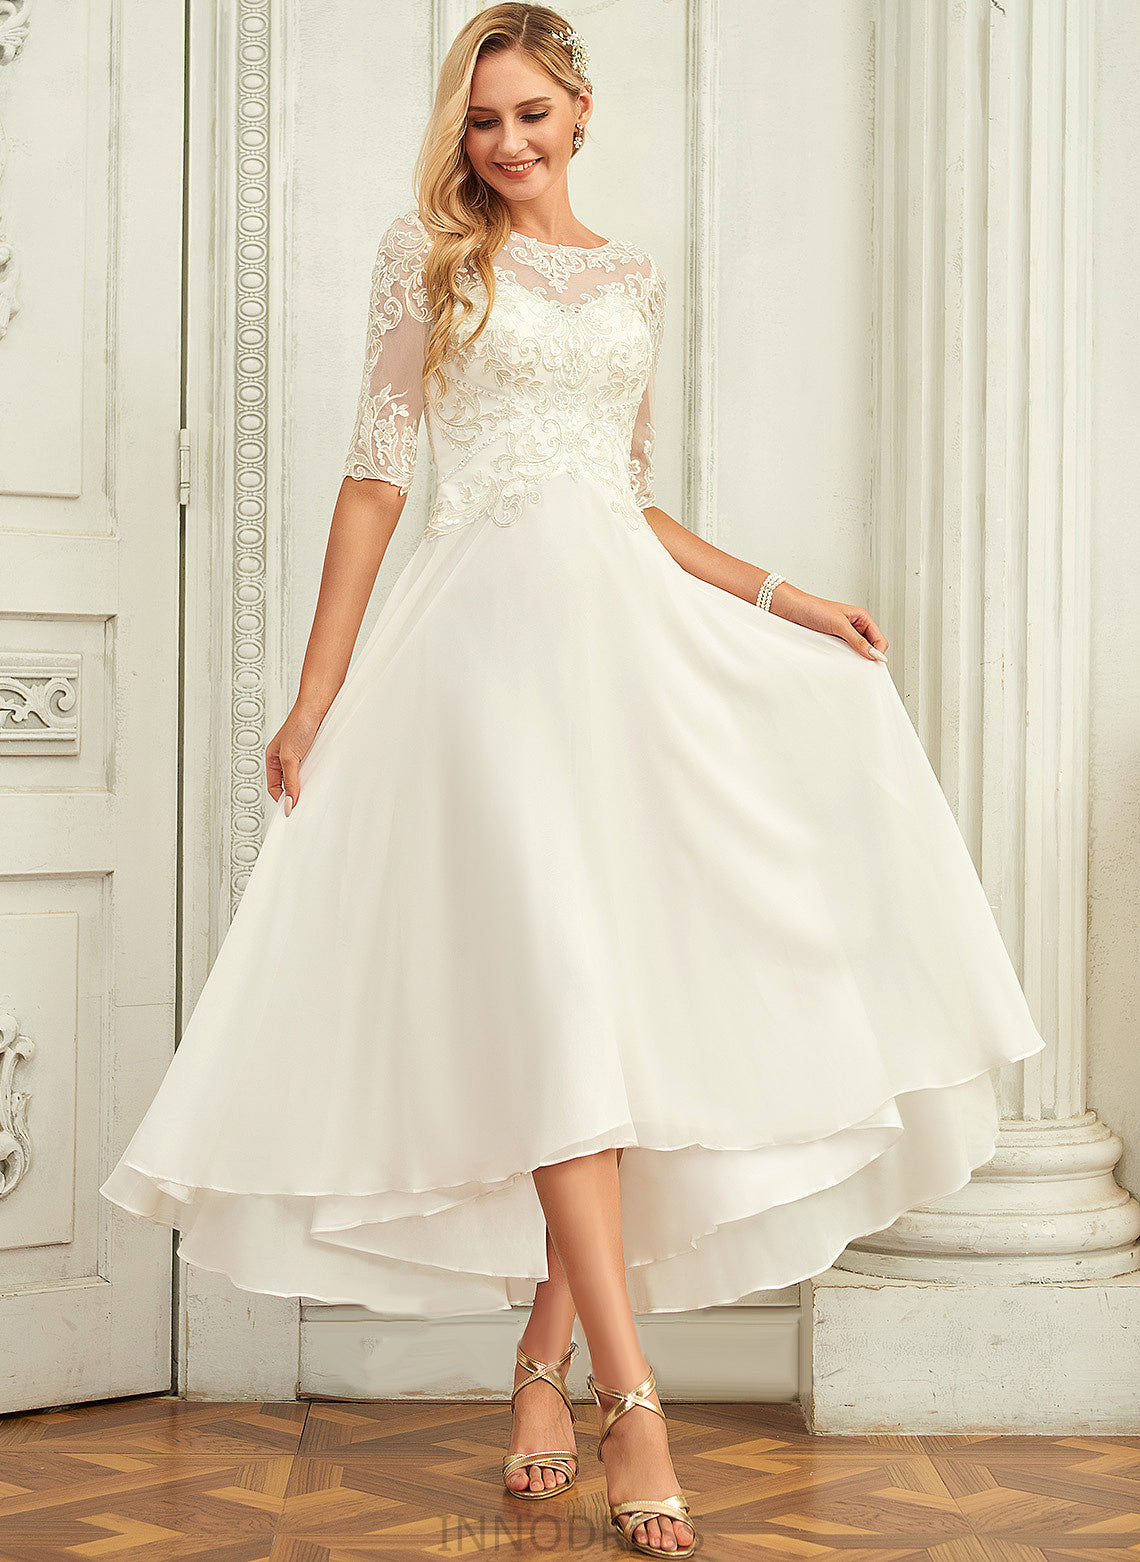 With A-Line Asymmetrical Wedding Dresses Sequins Chiffon Dress Scoop Lace Beading Melody Wedding